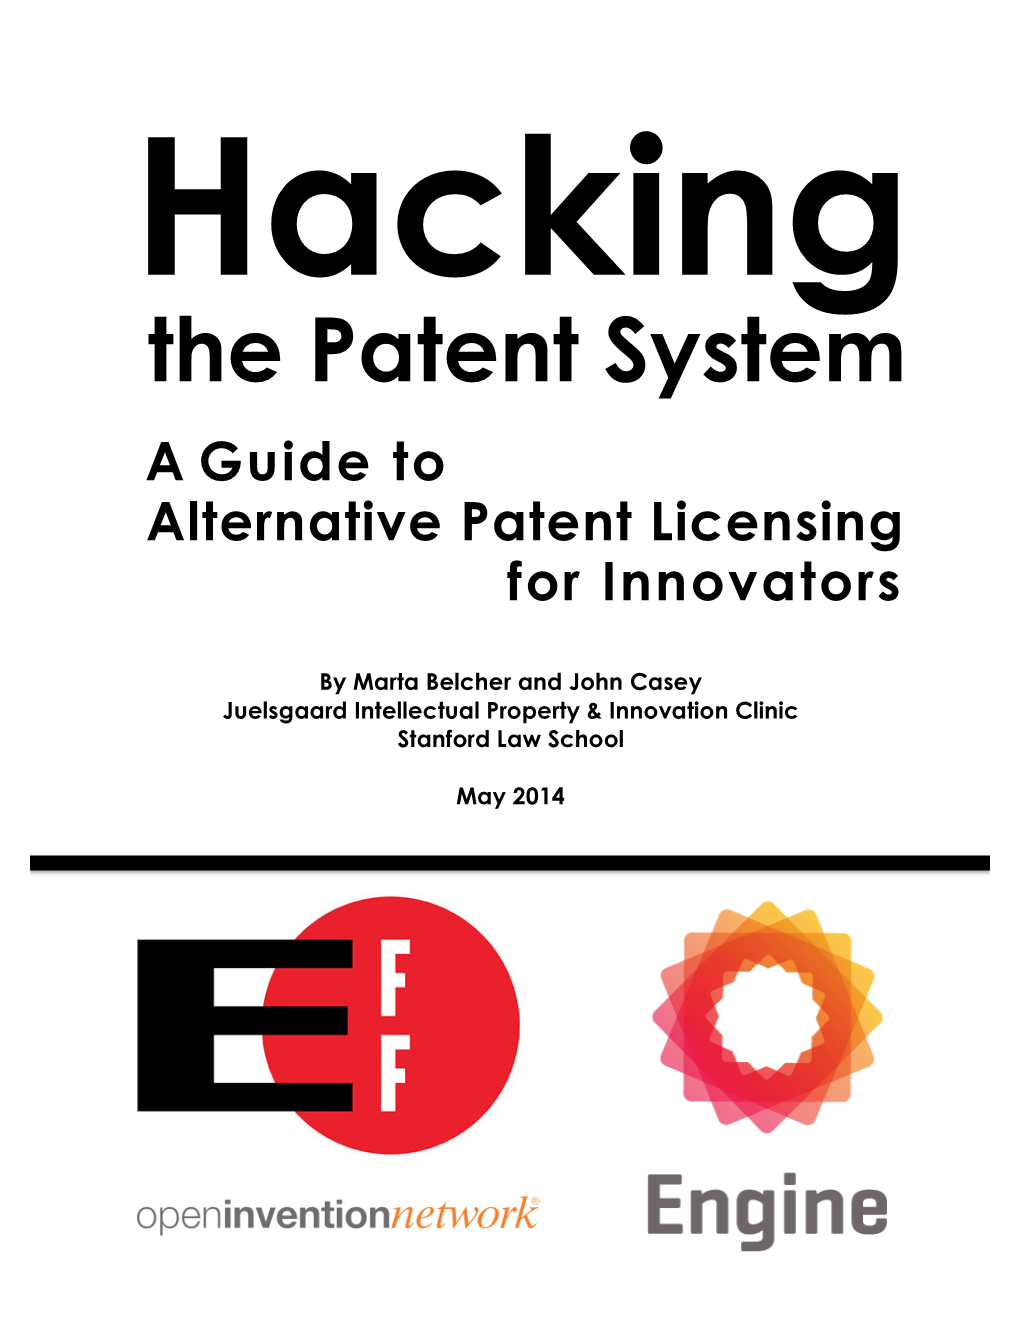 Alternative Patent Licensing Paper May 19 2014